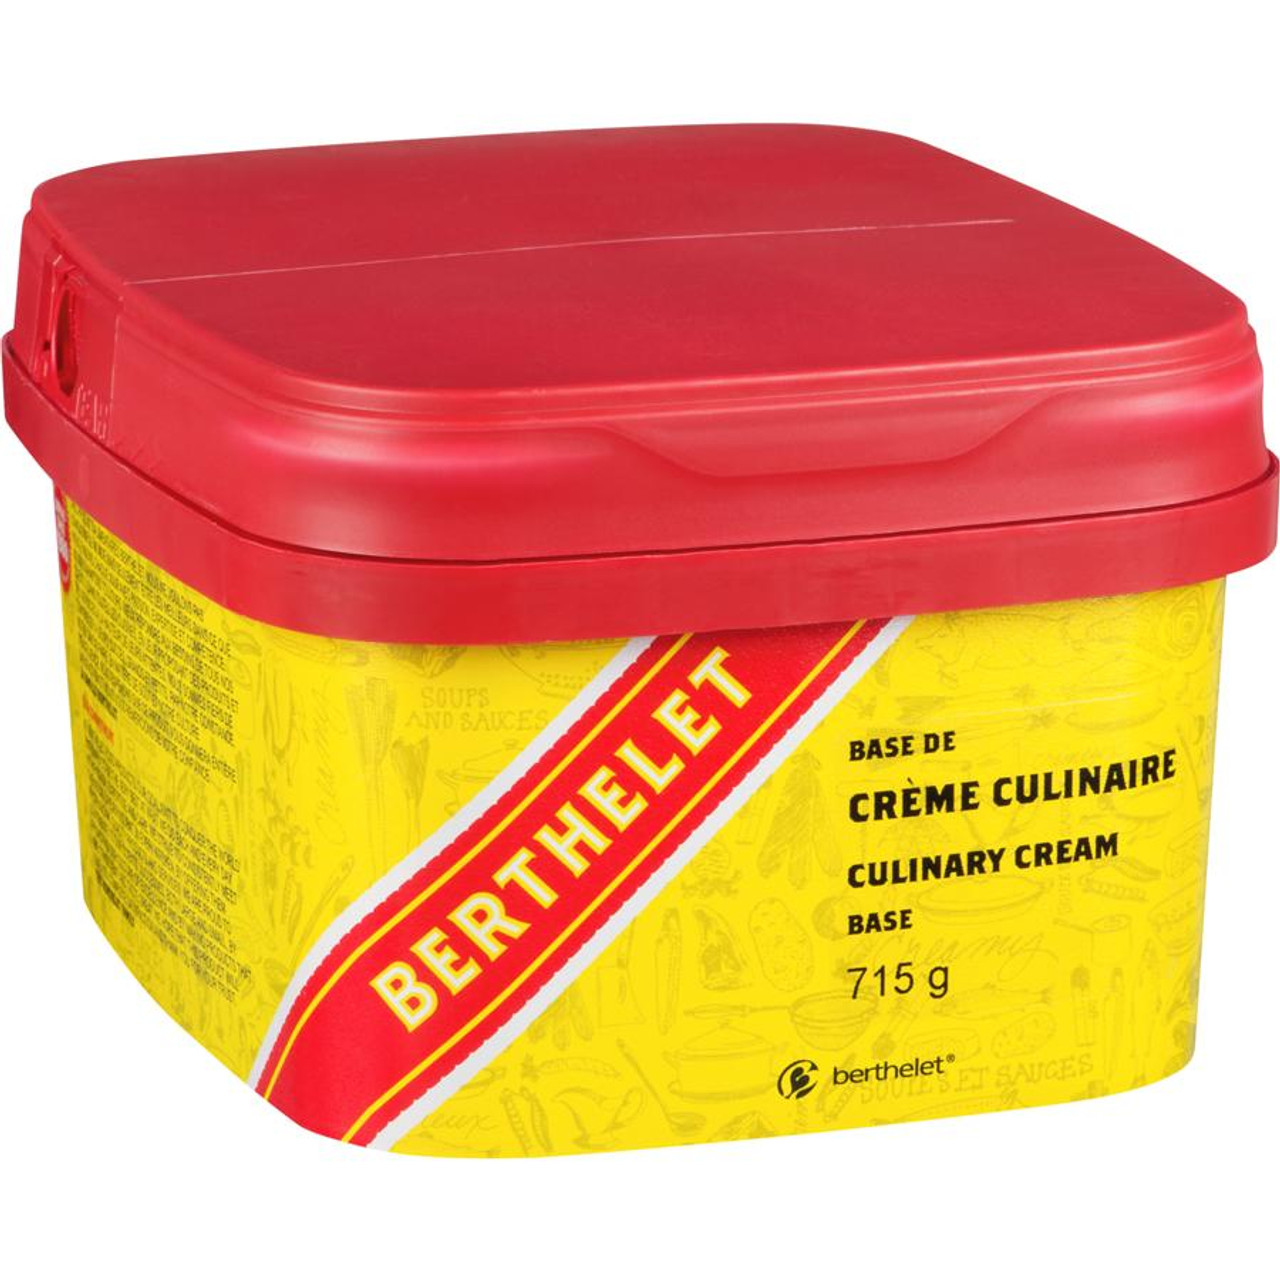  BERTHELET Culinary Cream Base 715g - Enhance Your Culinary Delights 